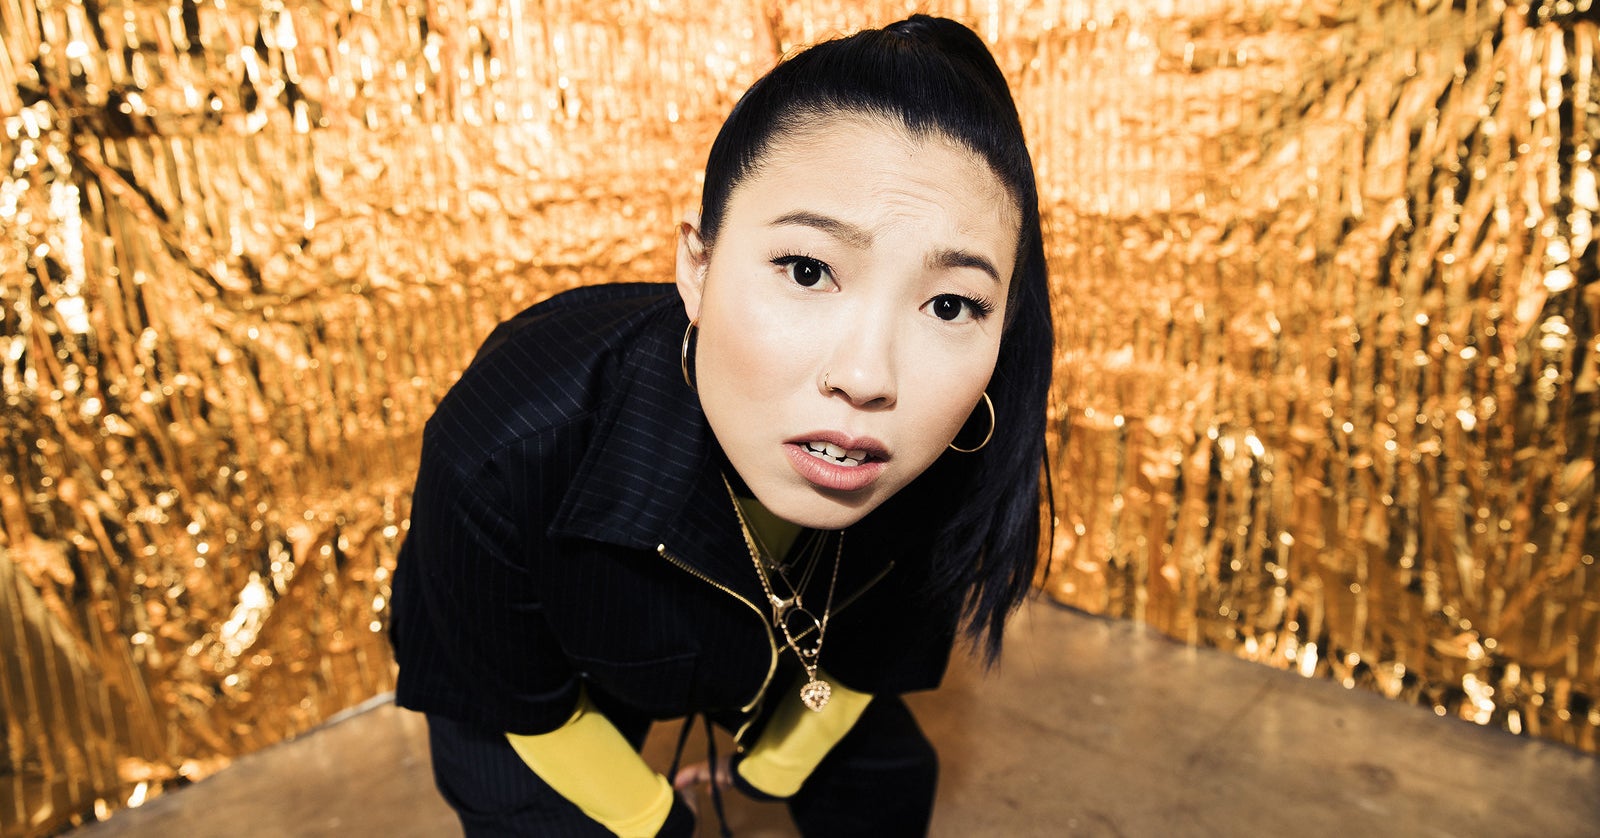 How Awkwafina Went From Rapping To “Ocean’s 8” And “Crazy